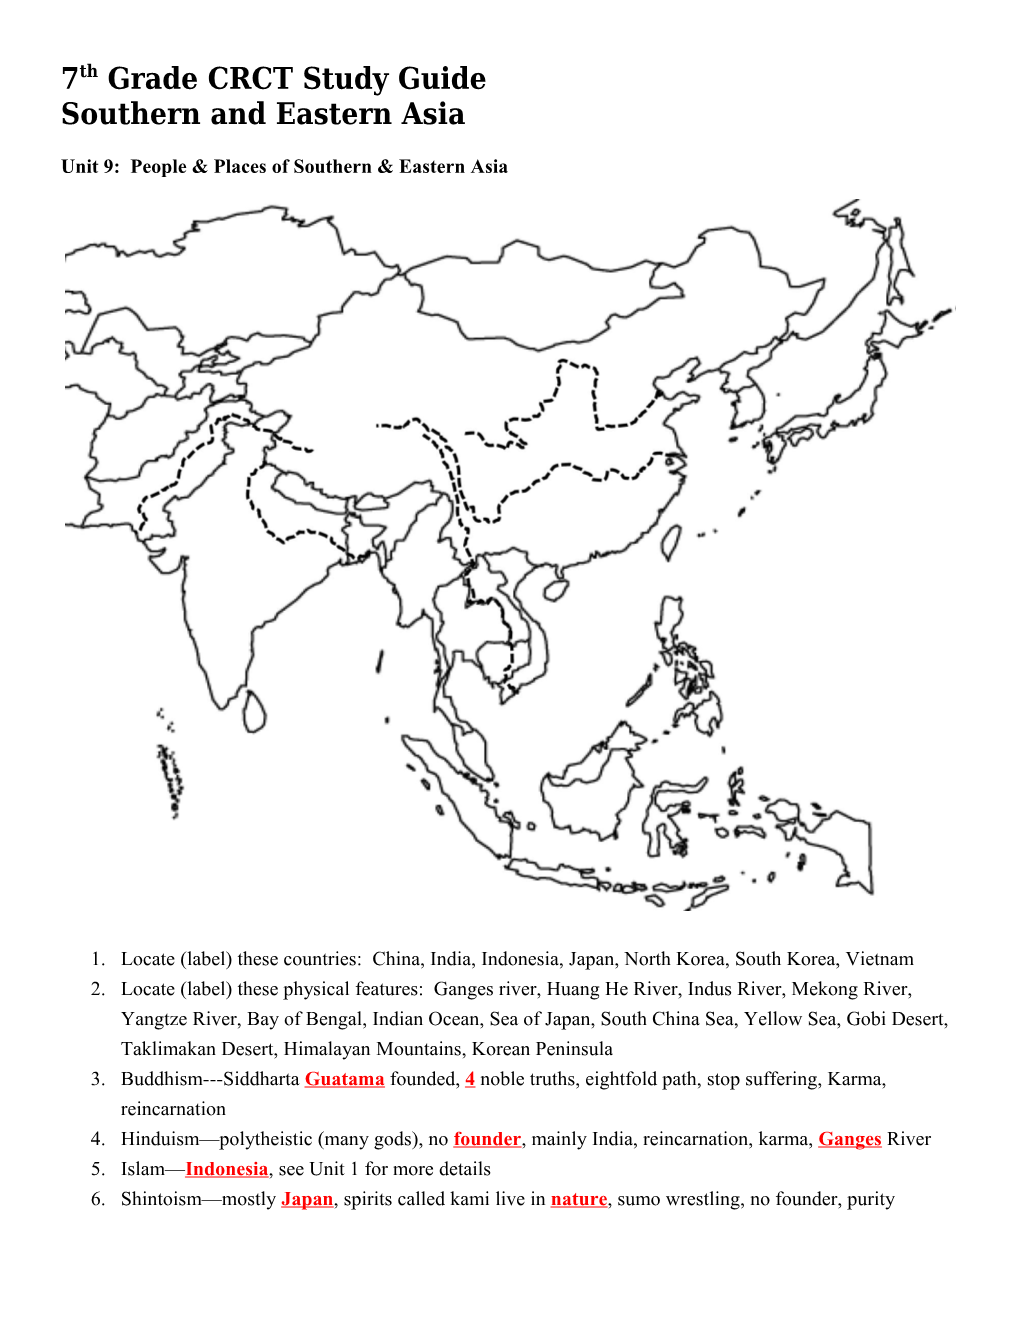 Unit 1: People & Places in SW Asia